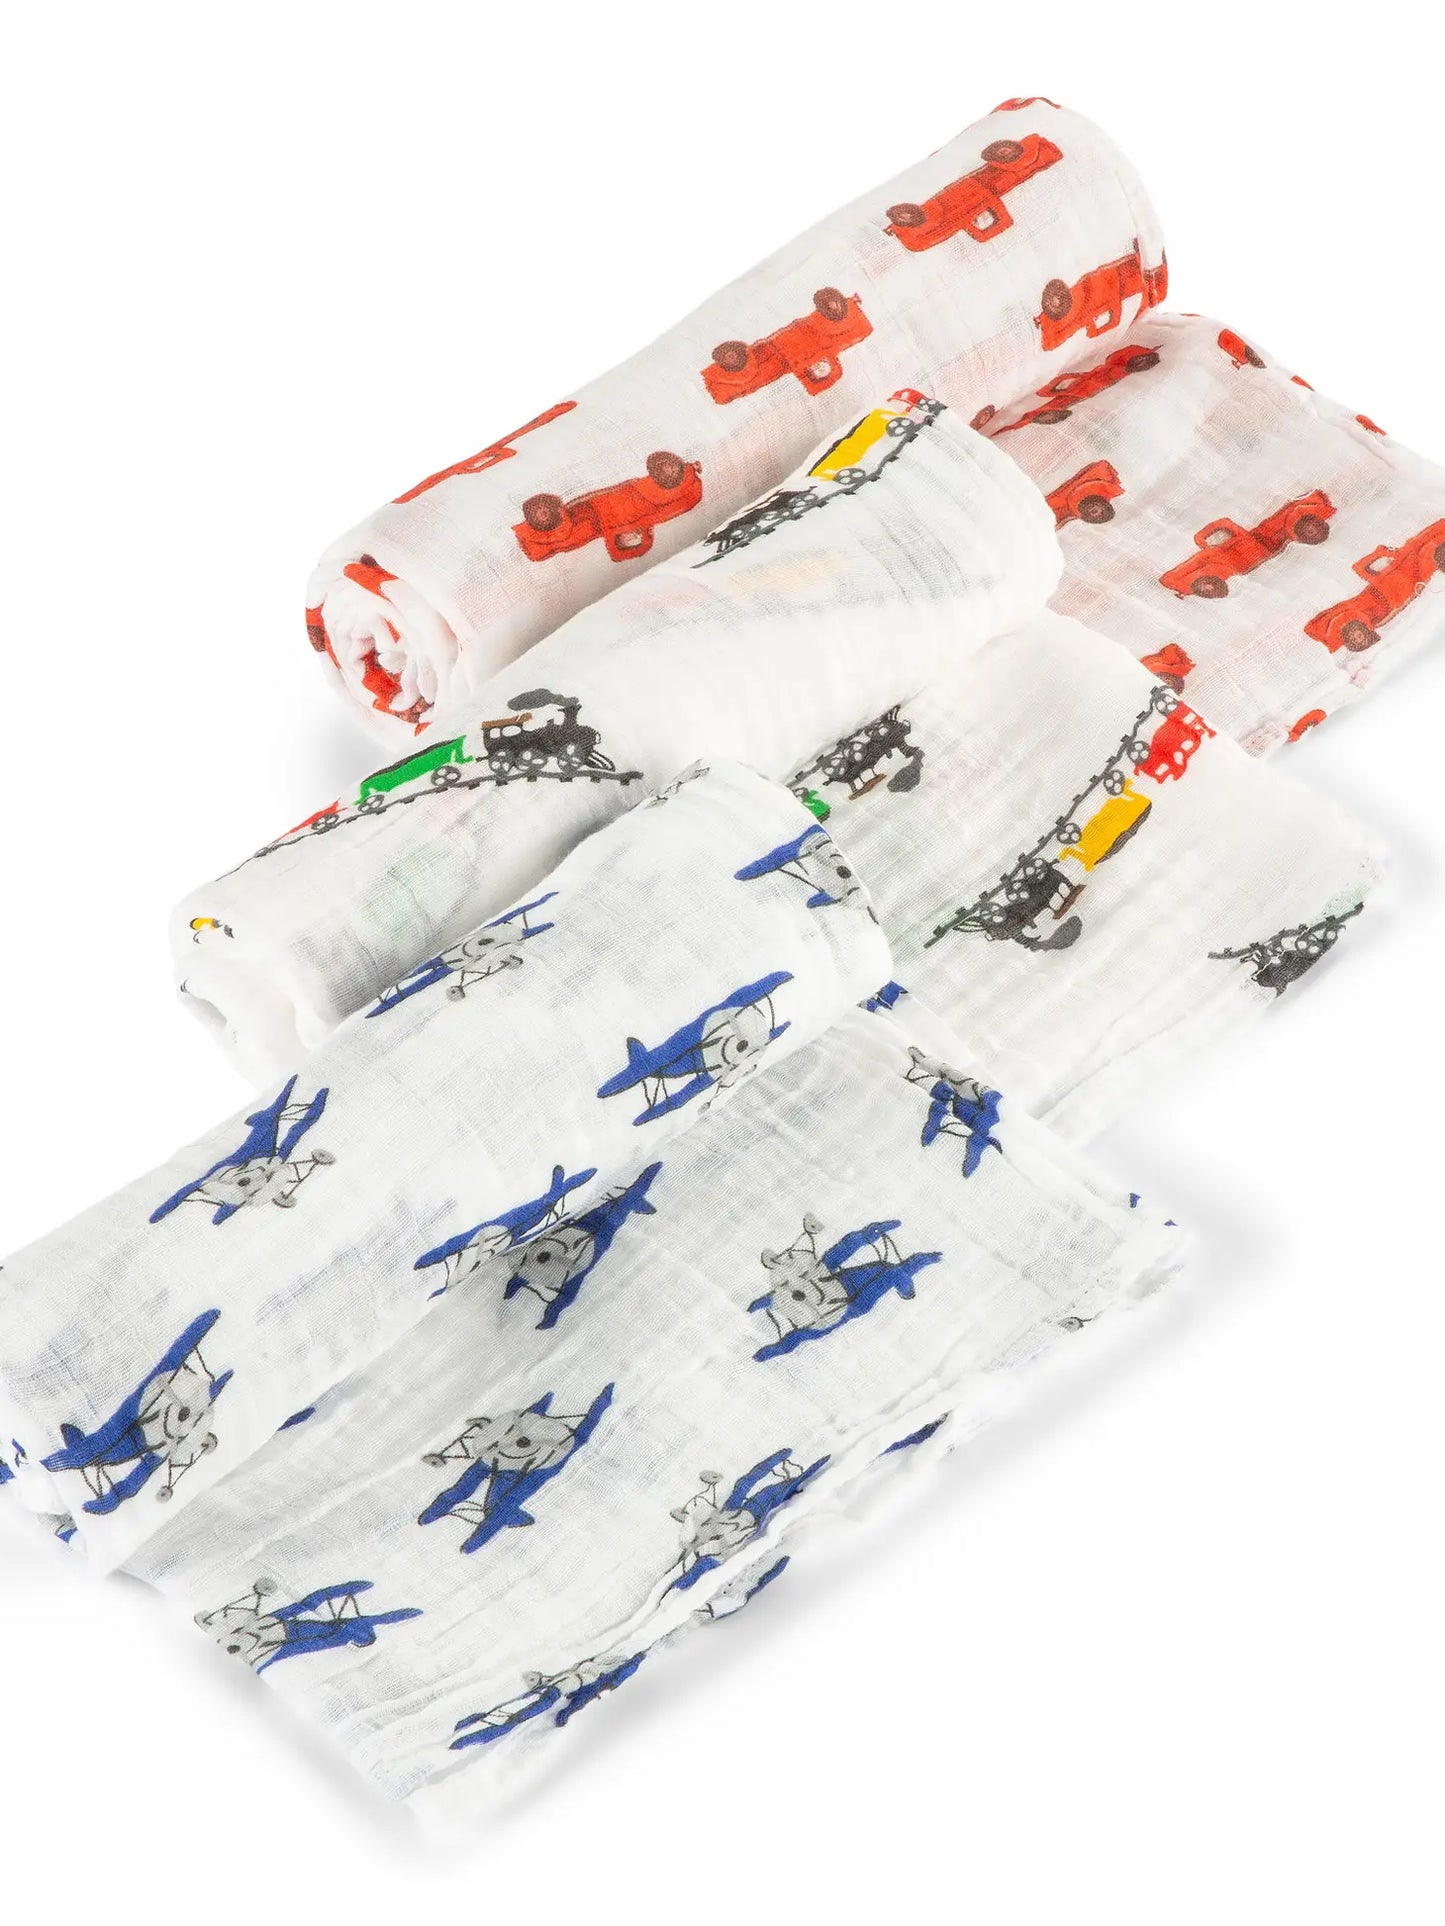 Planes, Trains, and Trucks, OH MY Swaddle Set